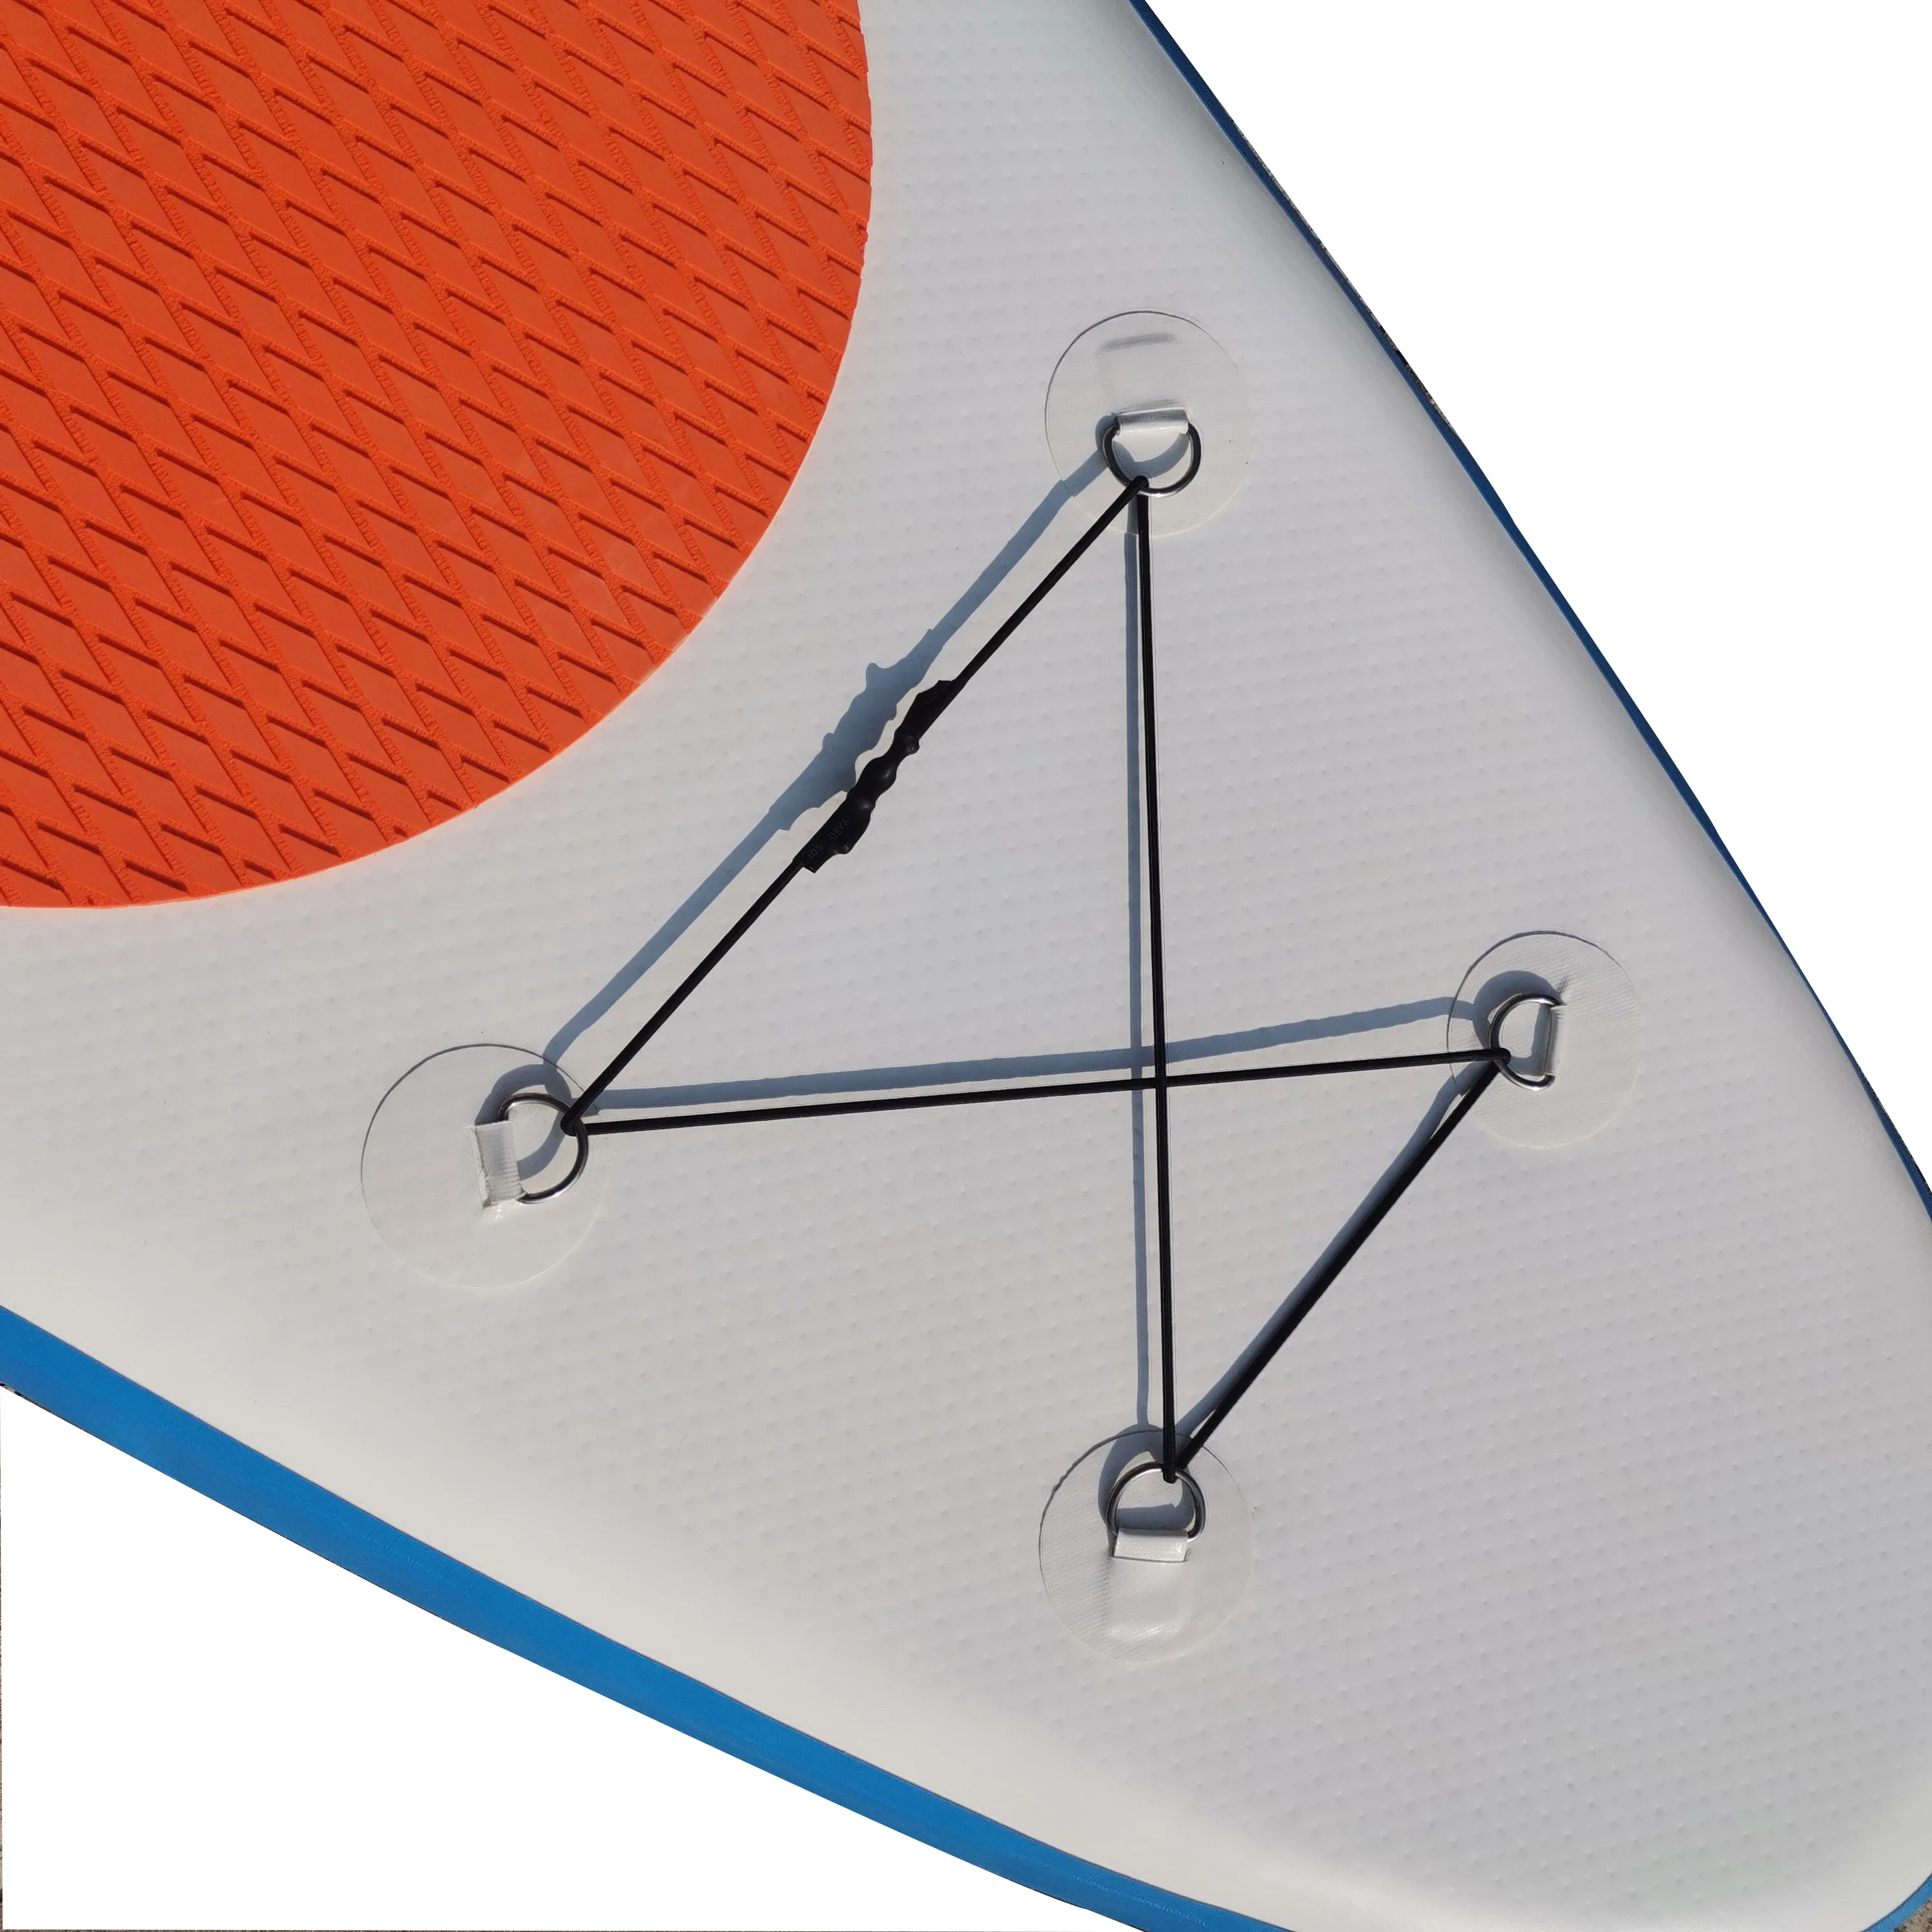 320cm Inflatable sup boards yoga paddle board stand up paddle boards for sale